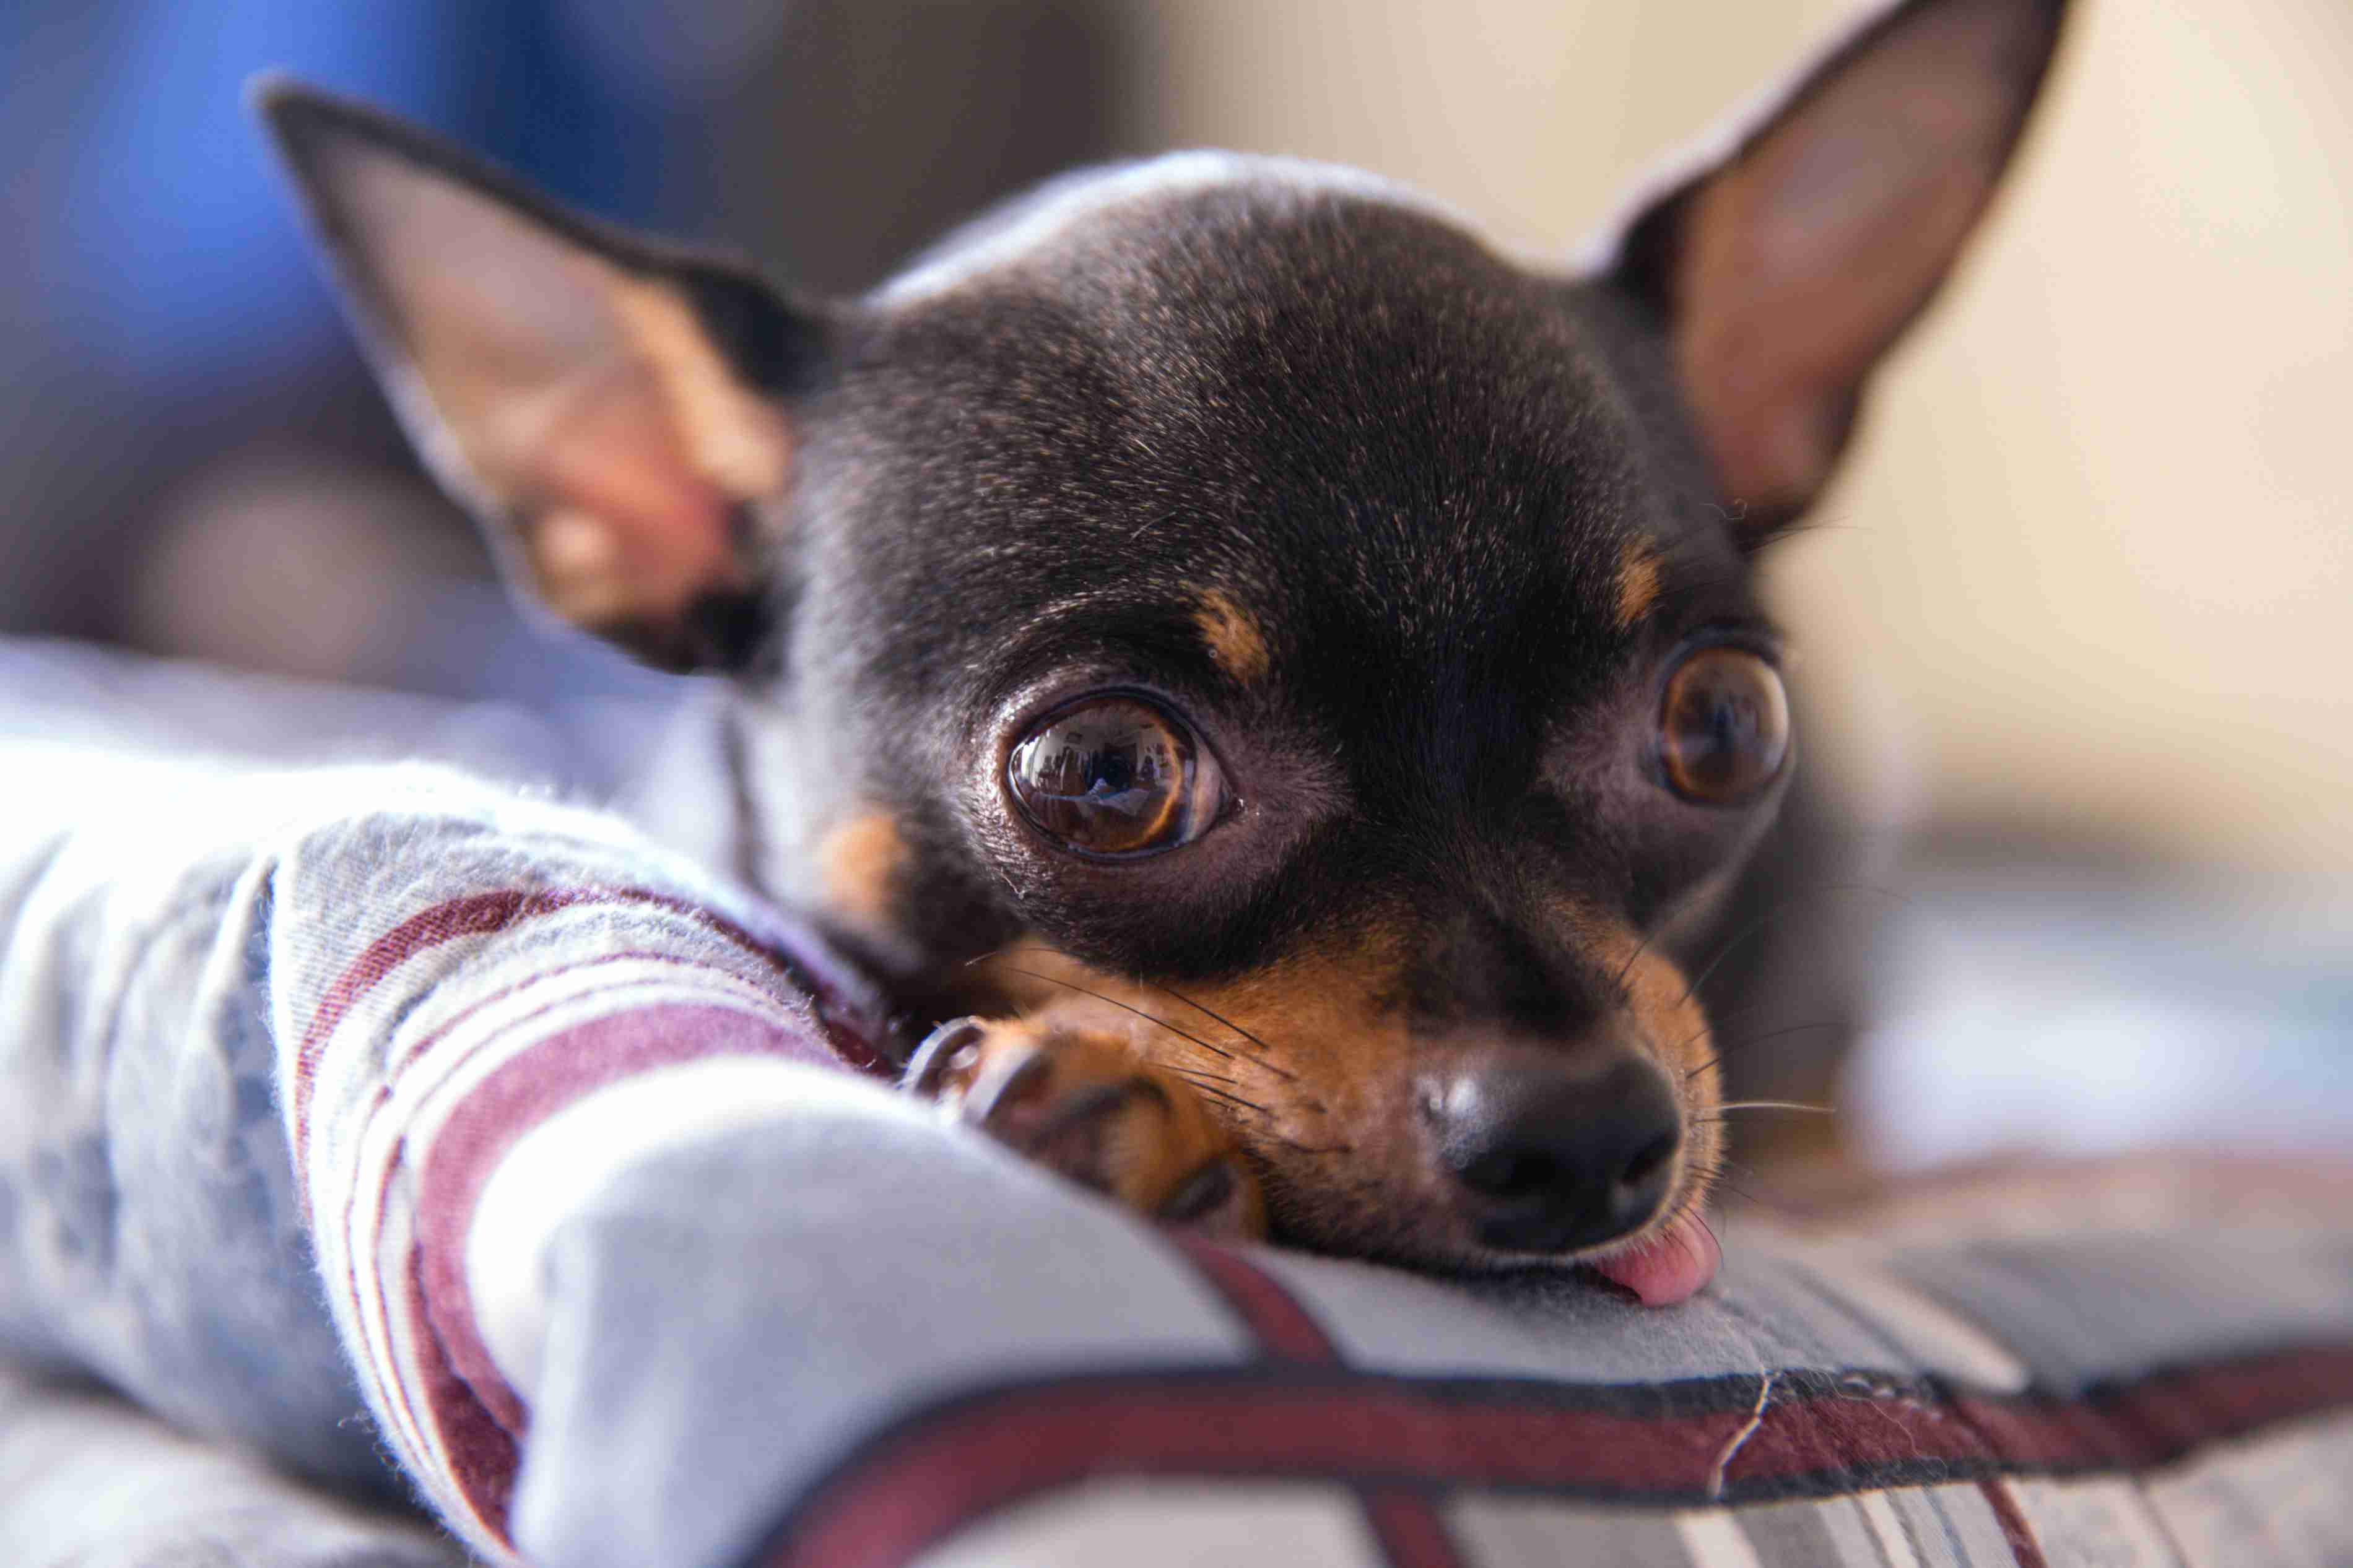 What are some common myths about Chihuahua aggression that can be harmful to the dog and their owners?